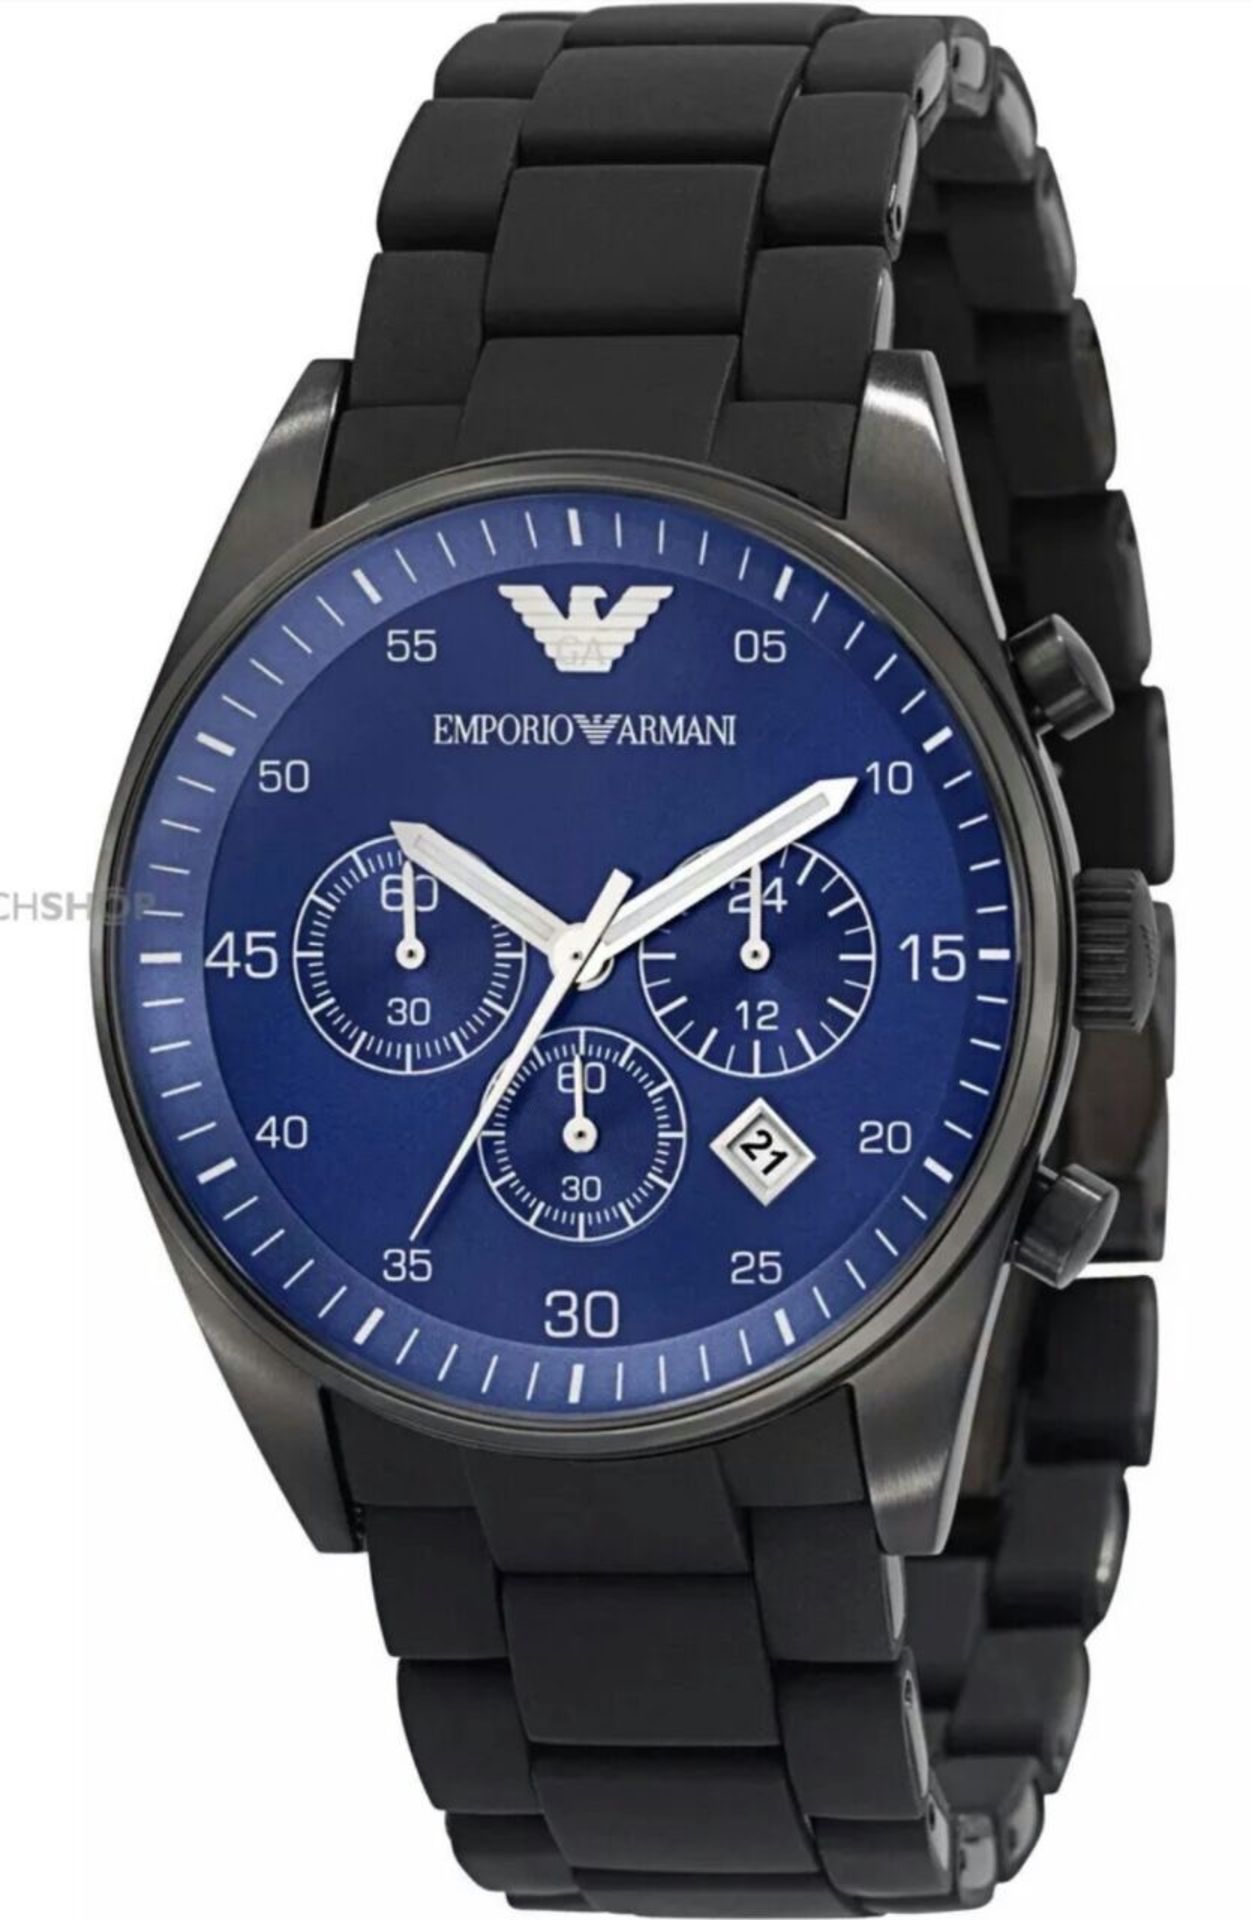 10 X BRAND NEW EMPORIO ARMANI DESIGNER WATCHES, COMPLETE WITH ORIGINAL ARMANI WATCH BOXES, MANUALS & - Image 9 of 10